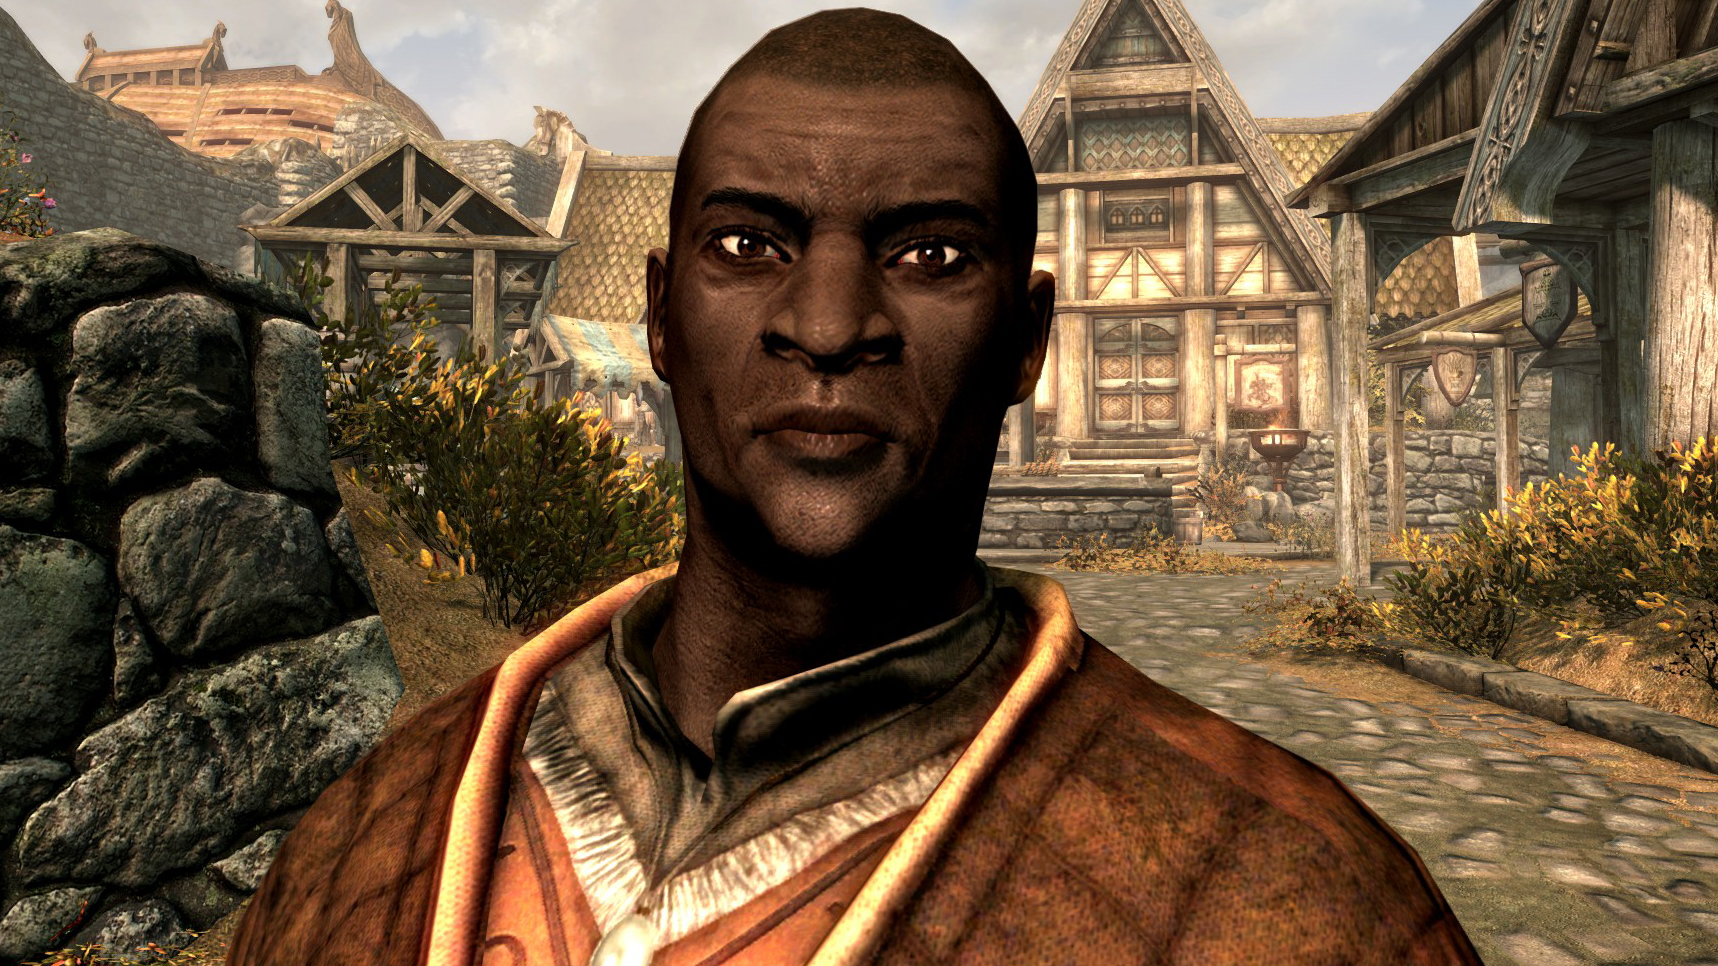  Skyrim player killing Nazeem every single day until The Elder Scrolls 6 is released has now done it 1,000 times, celebrates with a Nazeem-only battle royale 